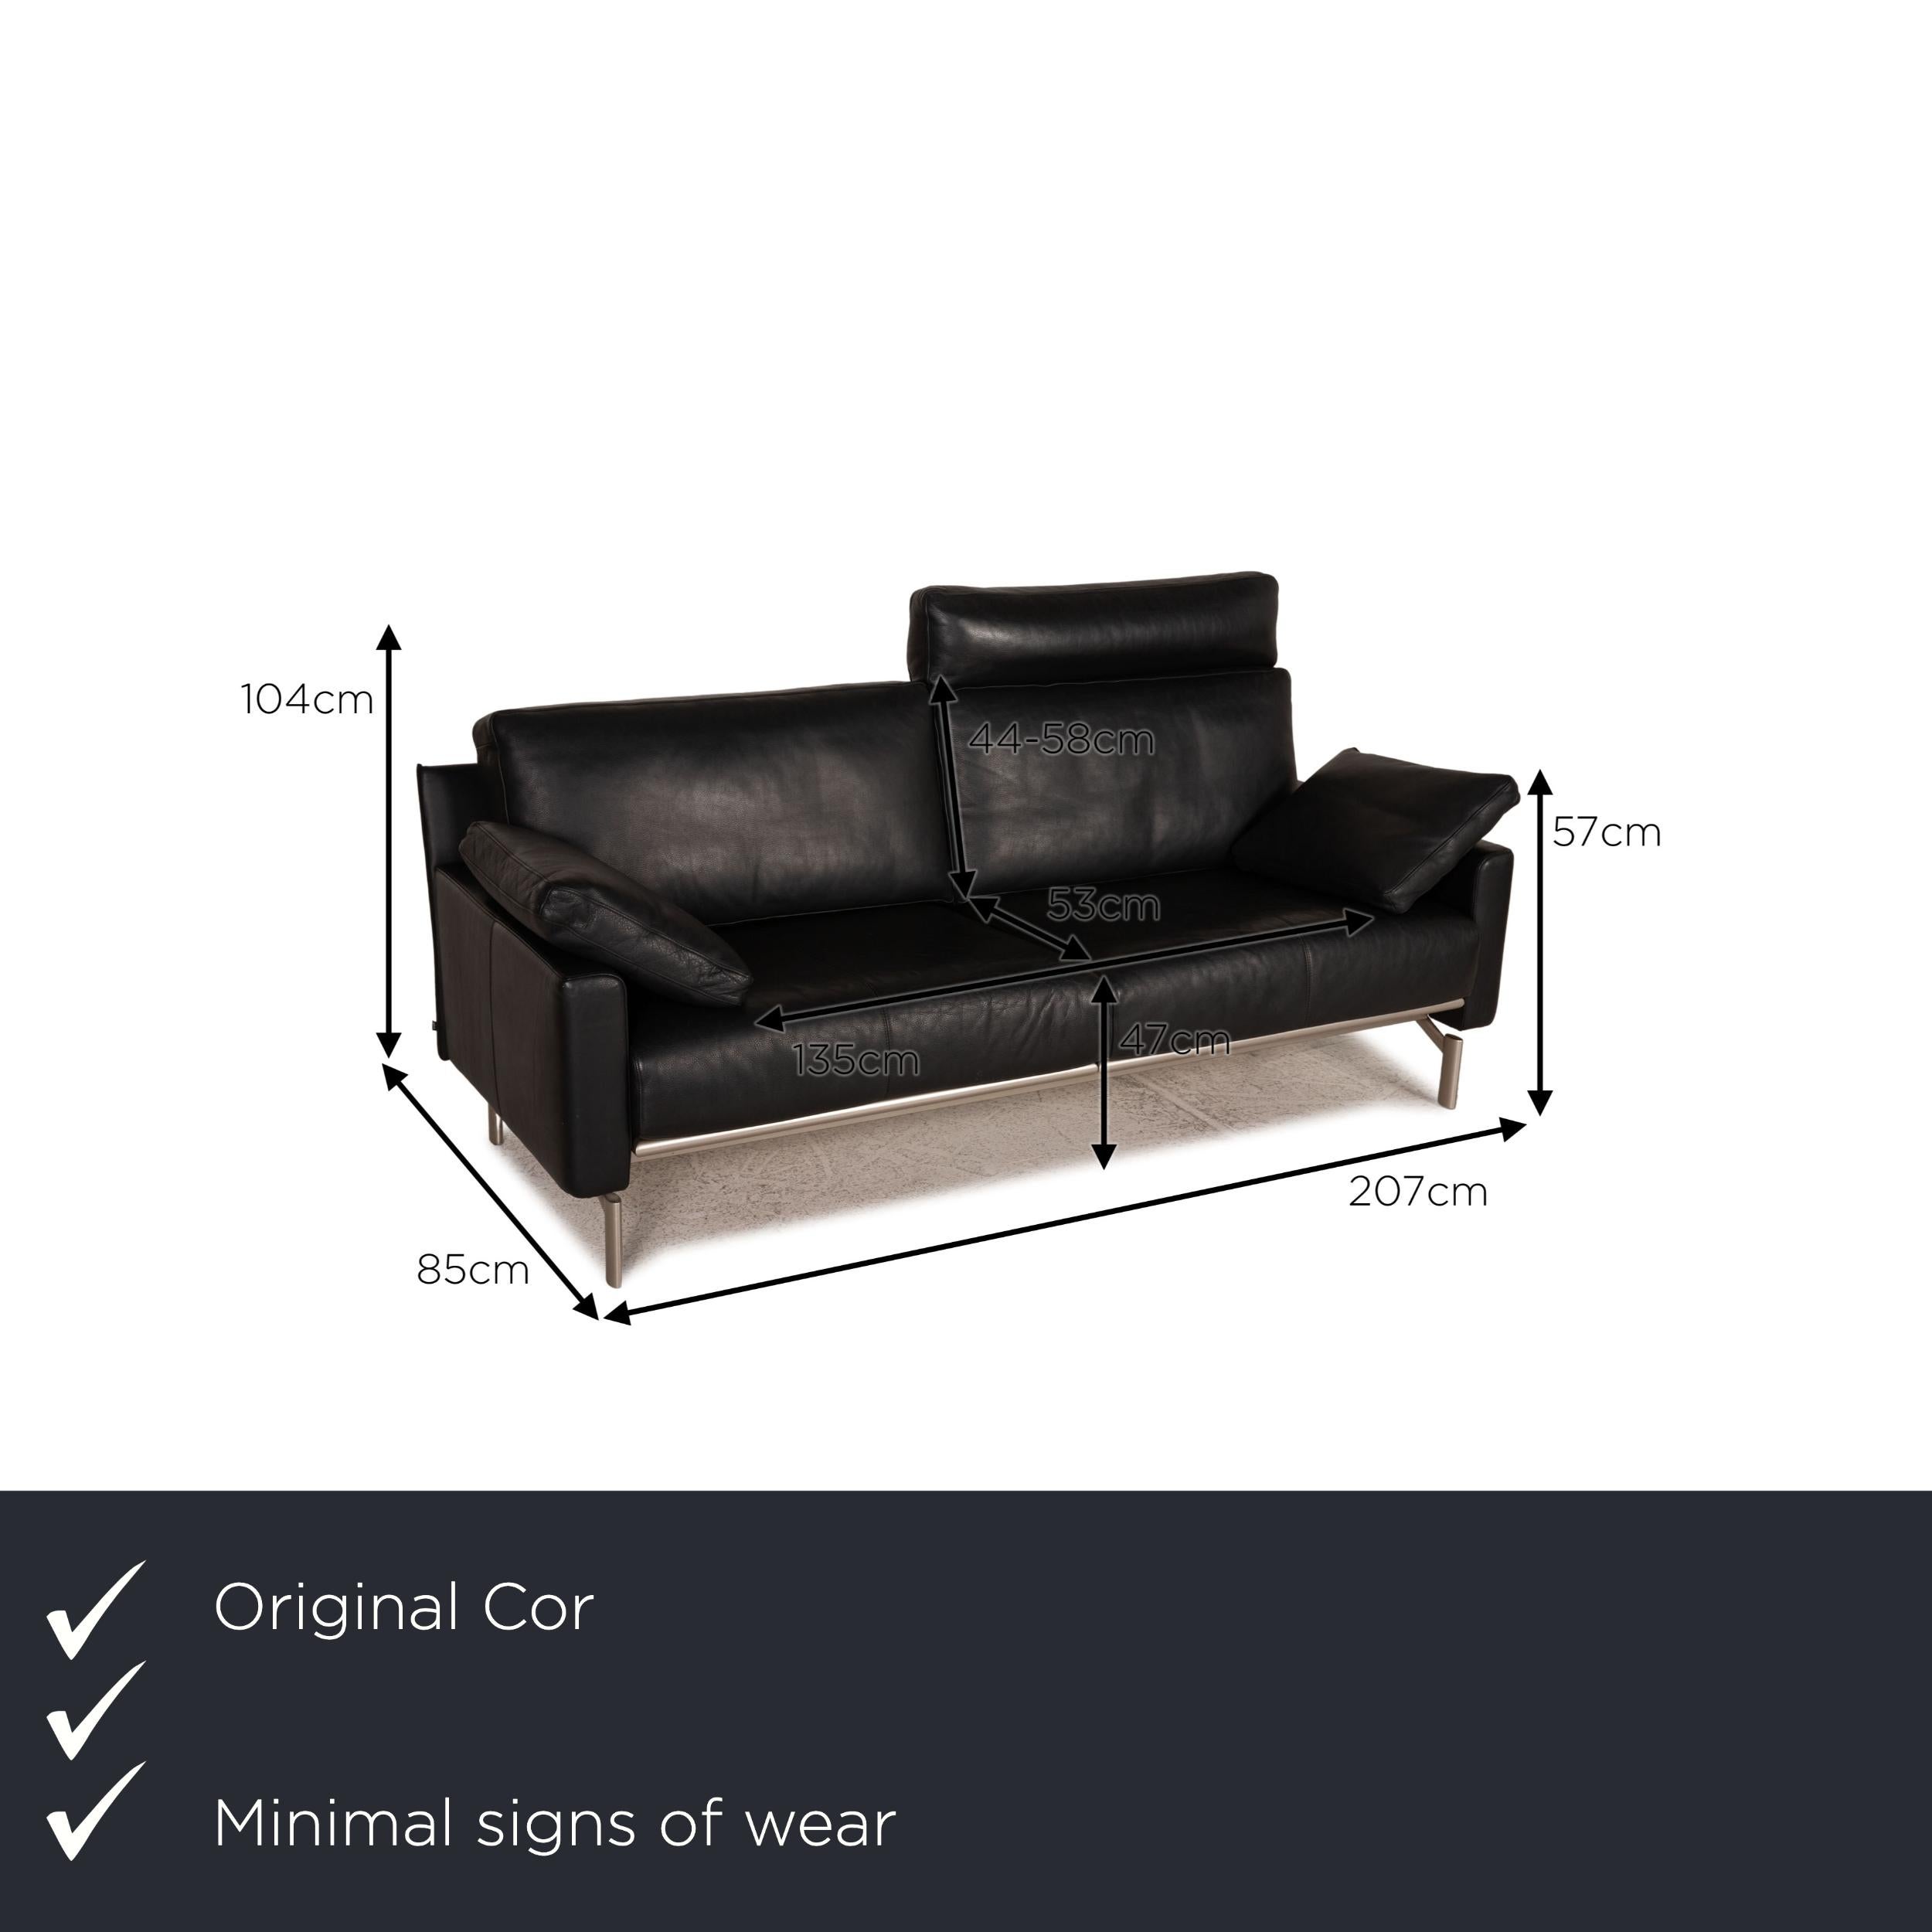 We present to you a Cor Ala leather sofa black three seater couch.

Product measurements in centimeters:

depth: 85
width: 207
height: 104
seat height: 47
rest height: 57
seat depth: 53
seat width: 135
back height: 44.

 